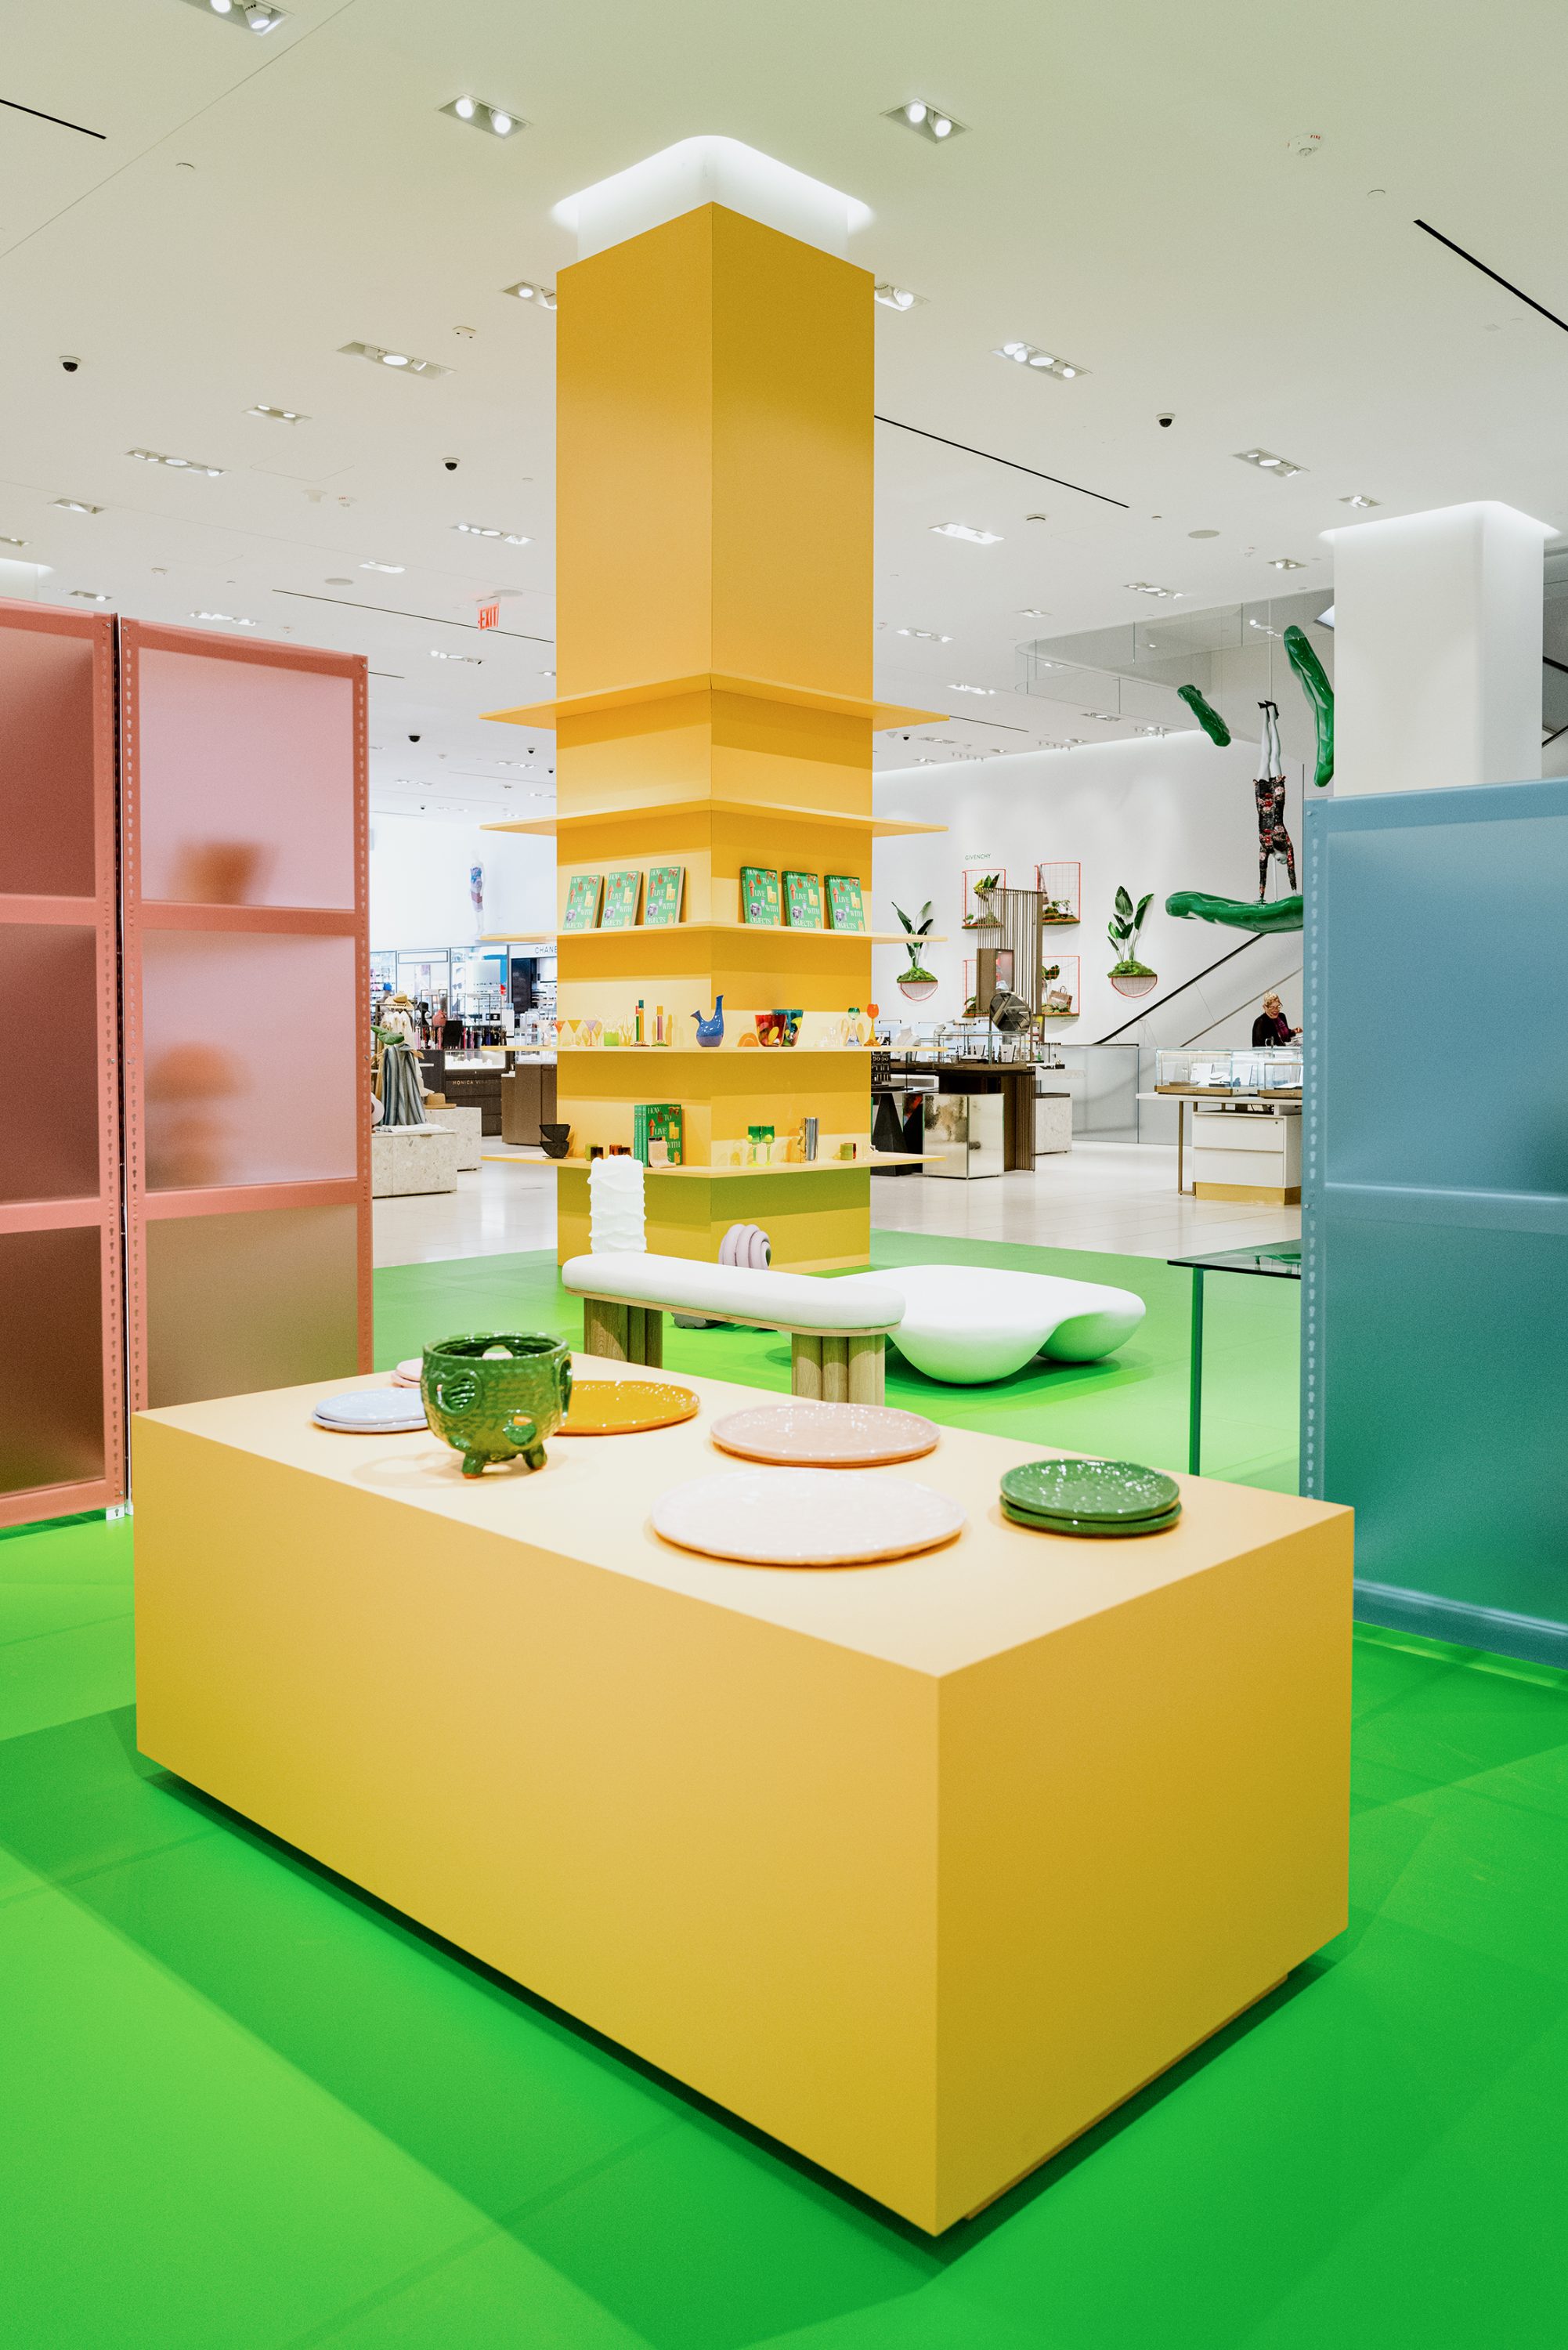 Nordstrom NYC Launches Limited Installation with Sight Unseen